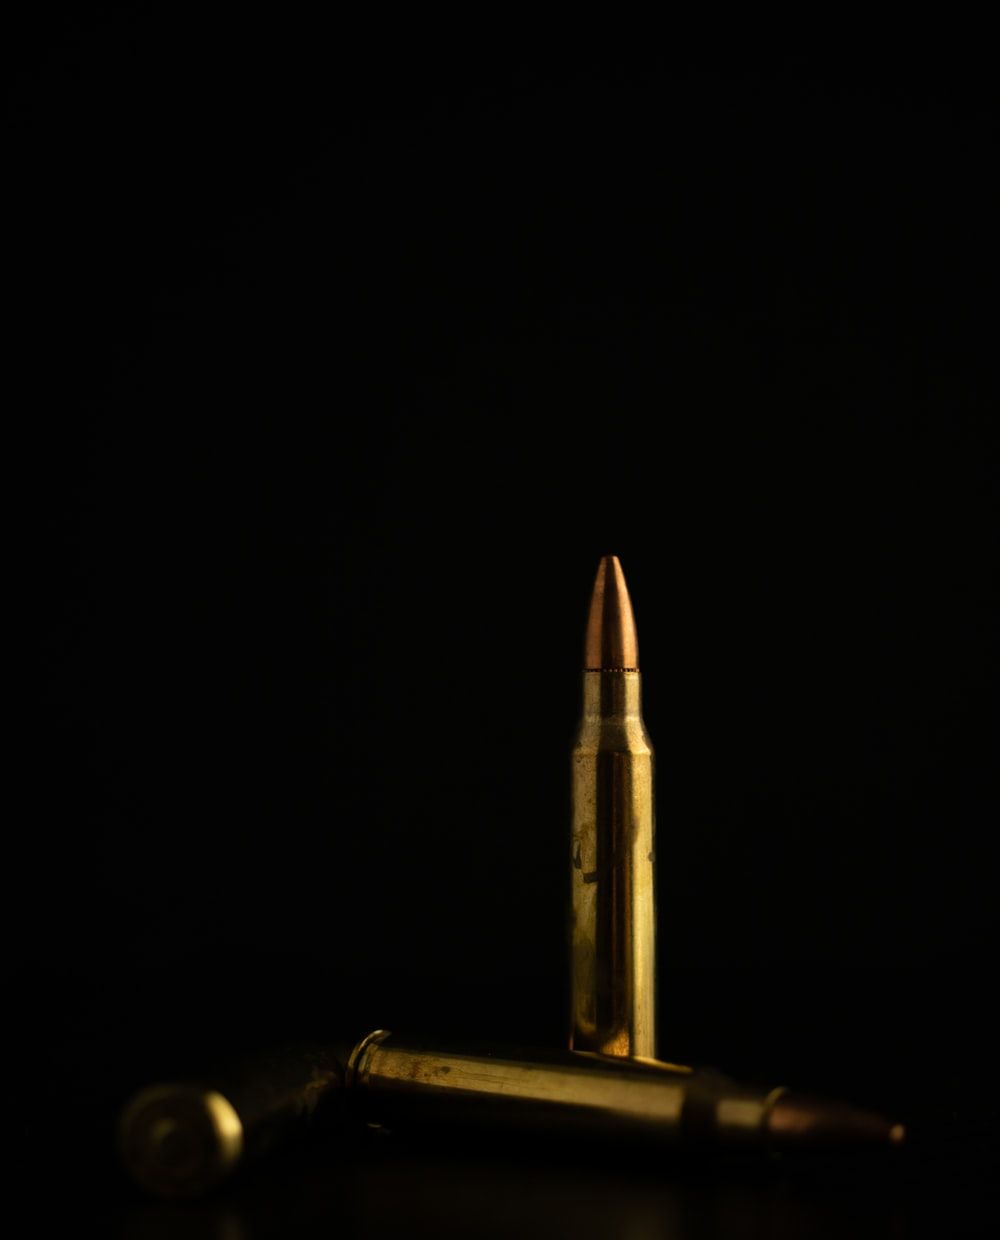 Ammo Picture. Download Free Image